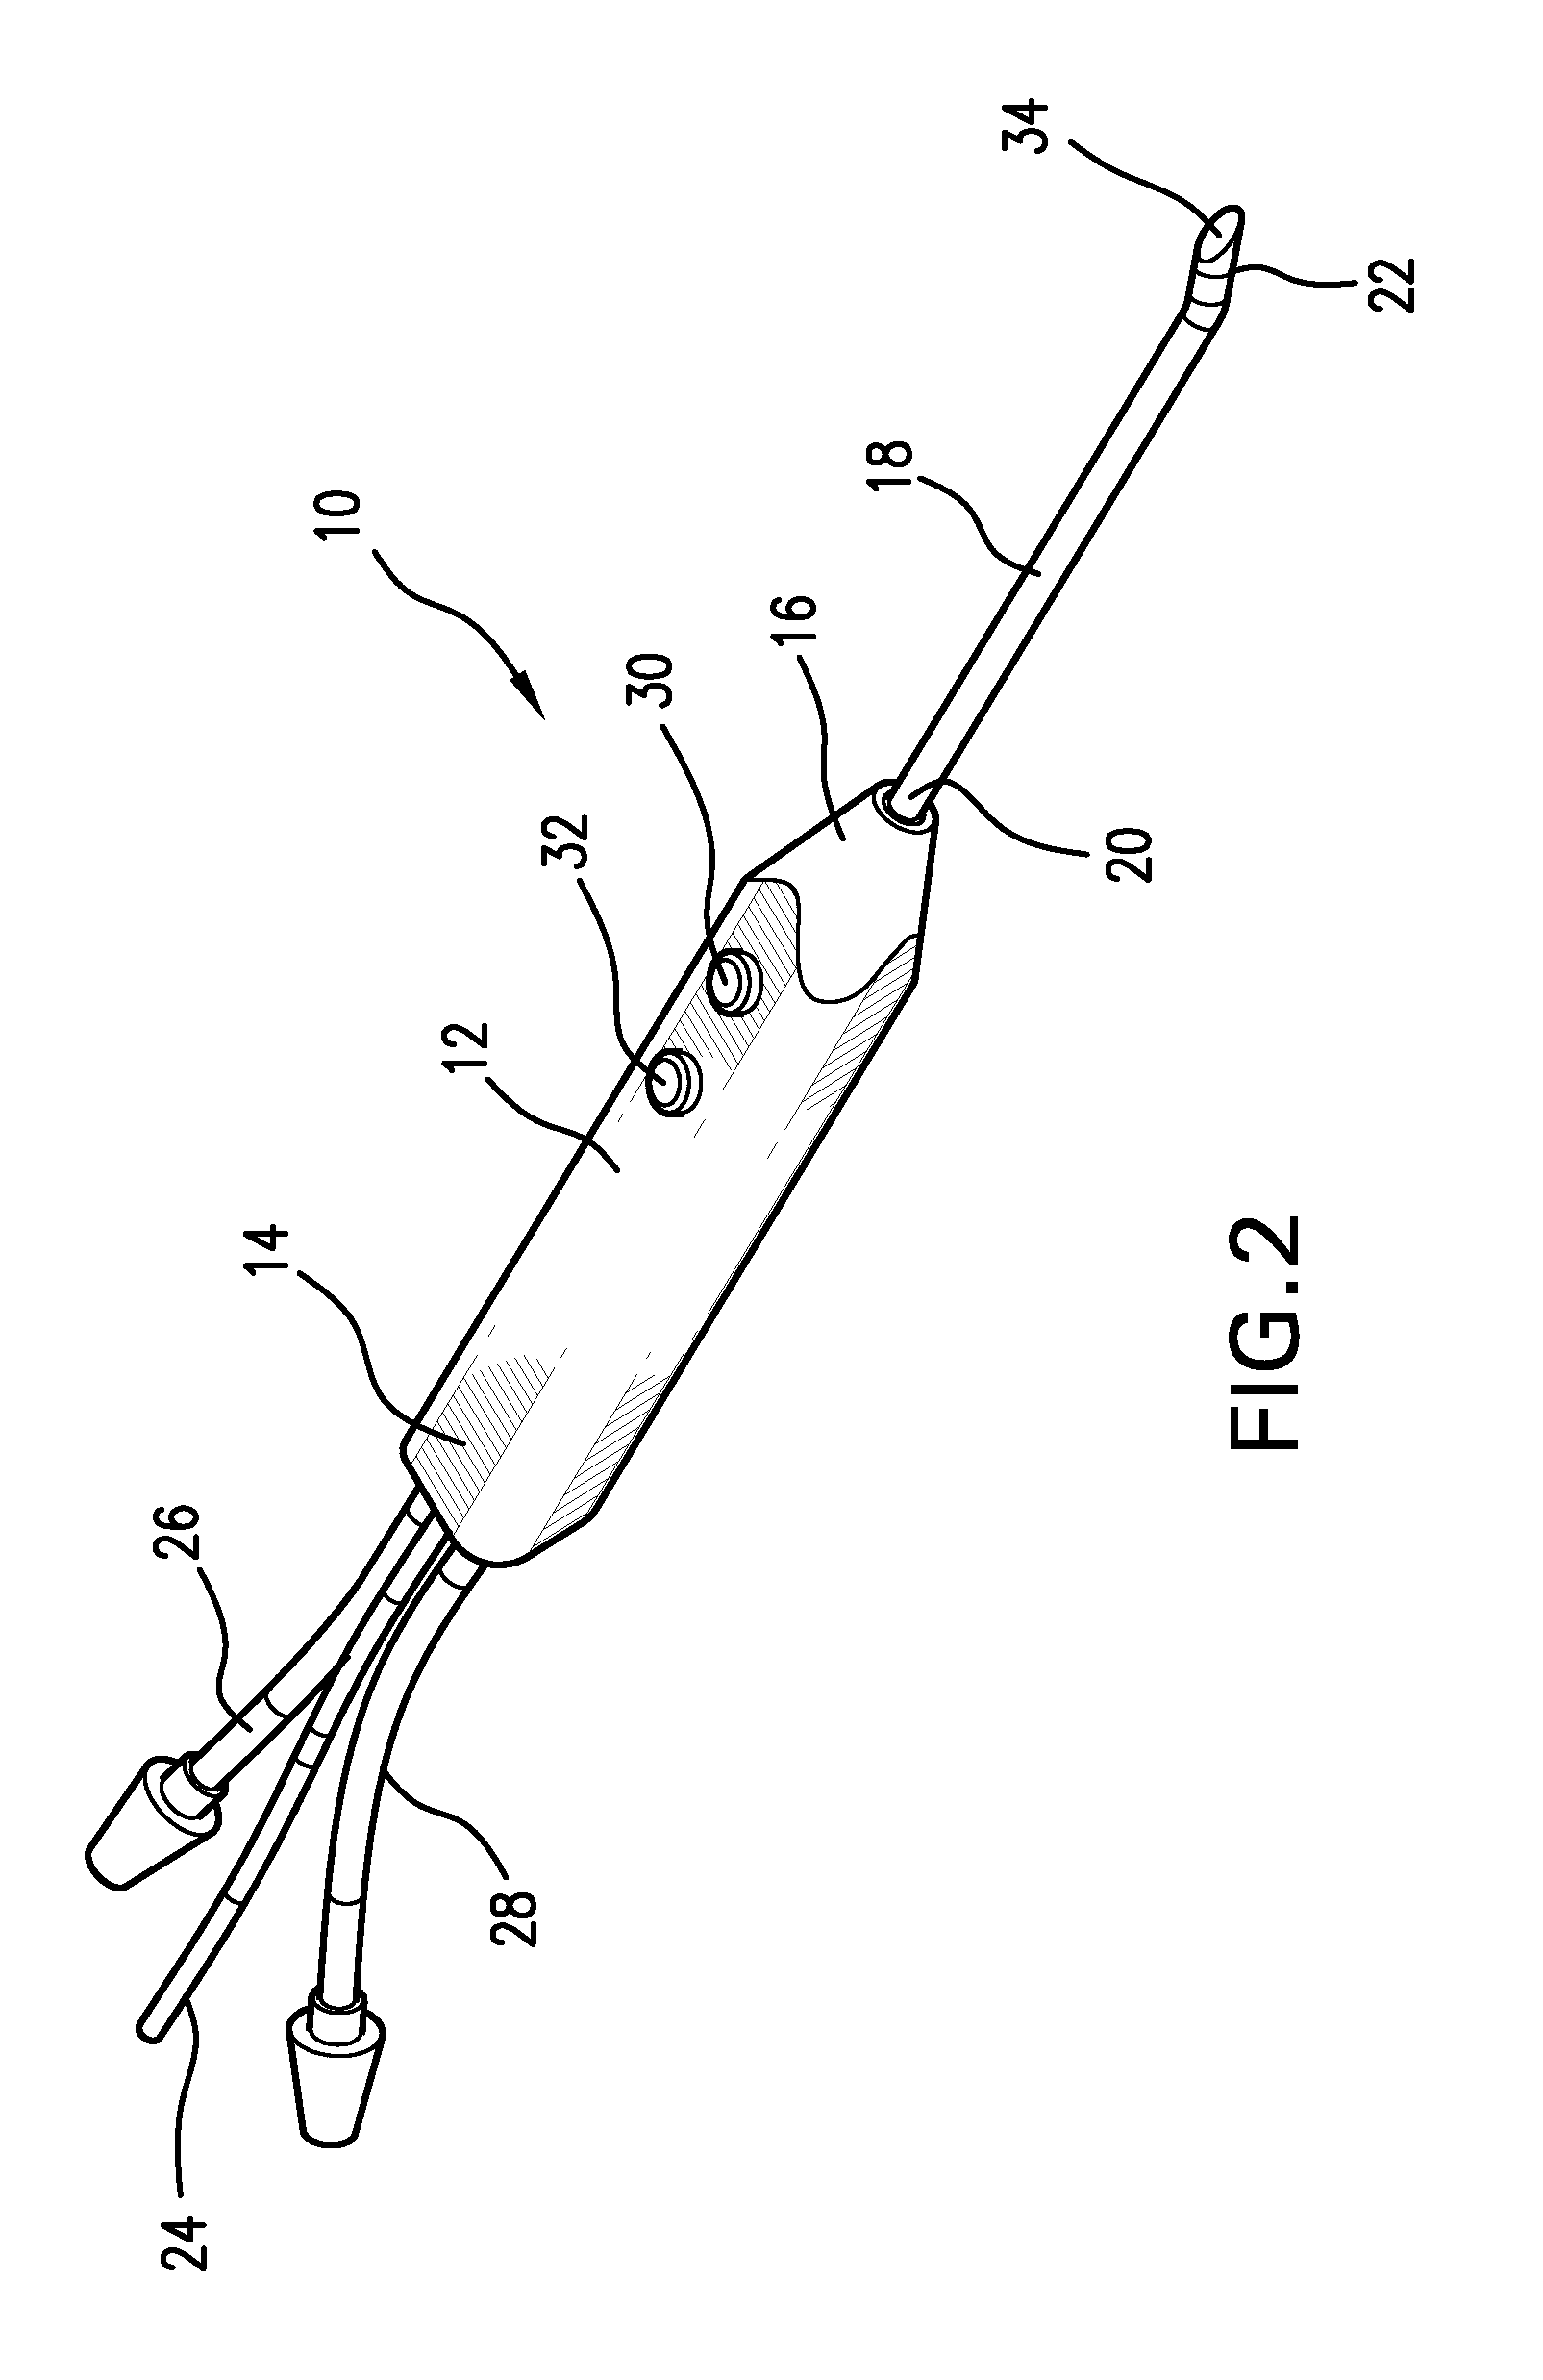 Electrosurgical device with floating-potential electrode and methods of using the same